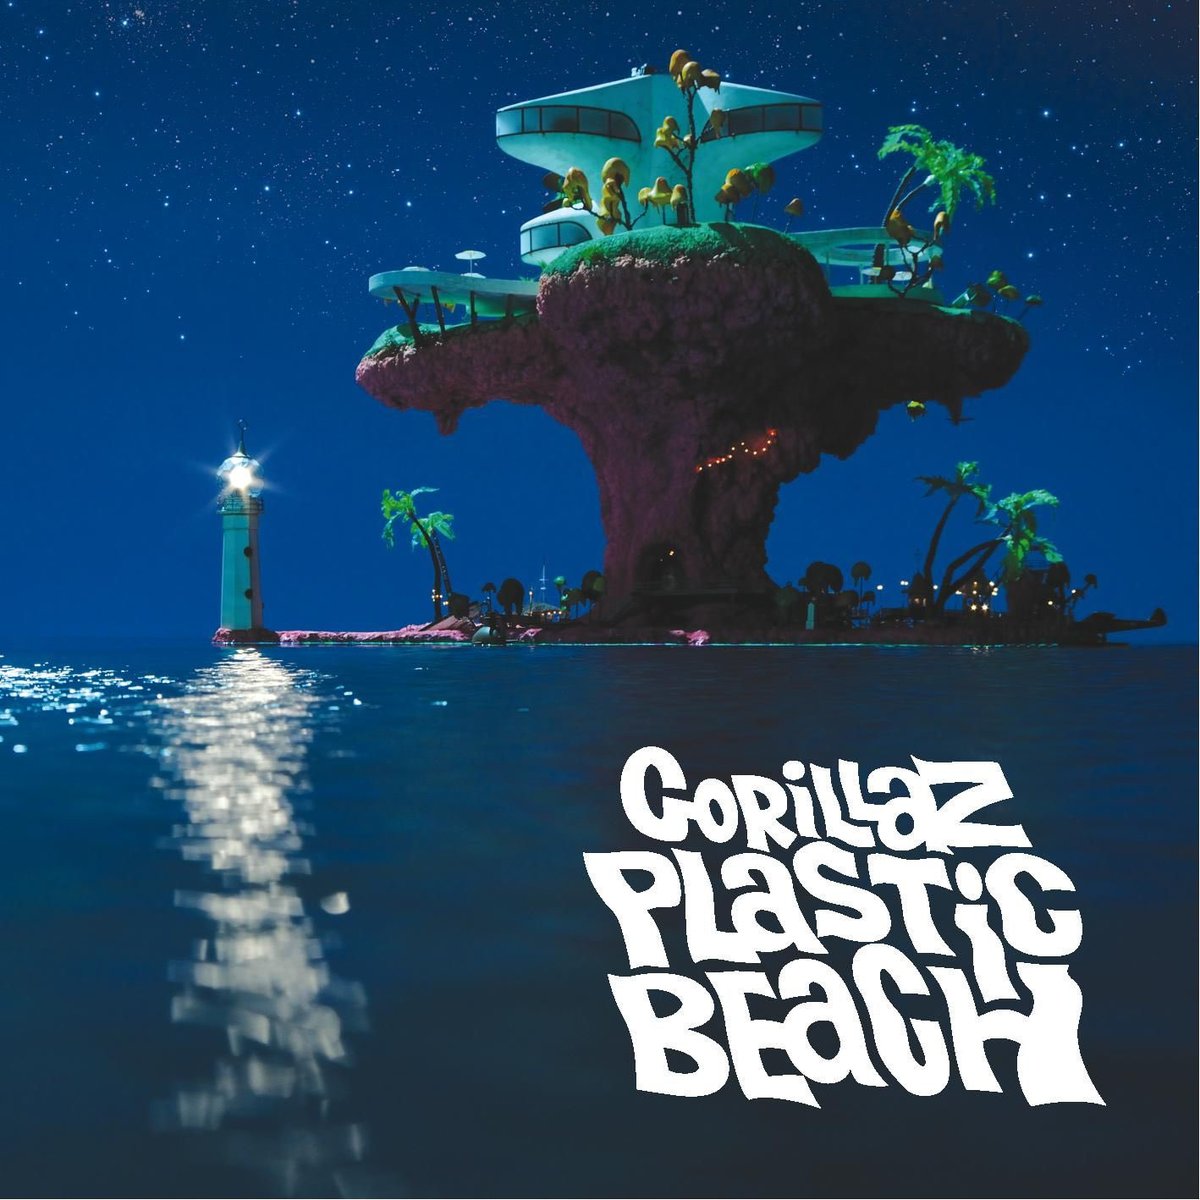 6. Gorillaz - Plastic BeachA loose concept with a surprising amount of meaning and ingenuity. As the album continues it becomes more synthesized and artificial almost as if it represents the increasingly problematic state of our environment.